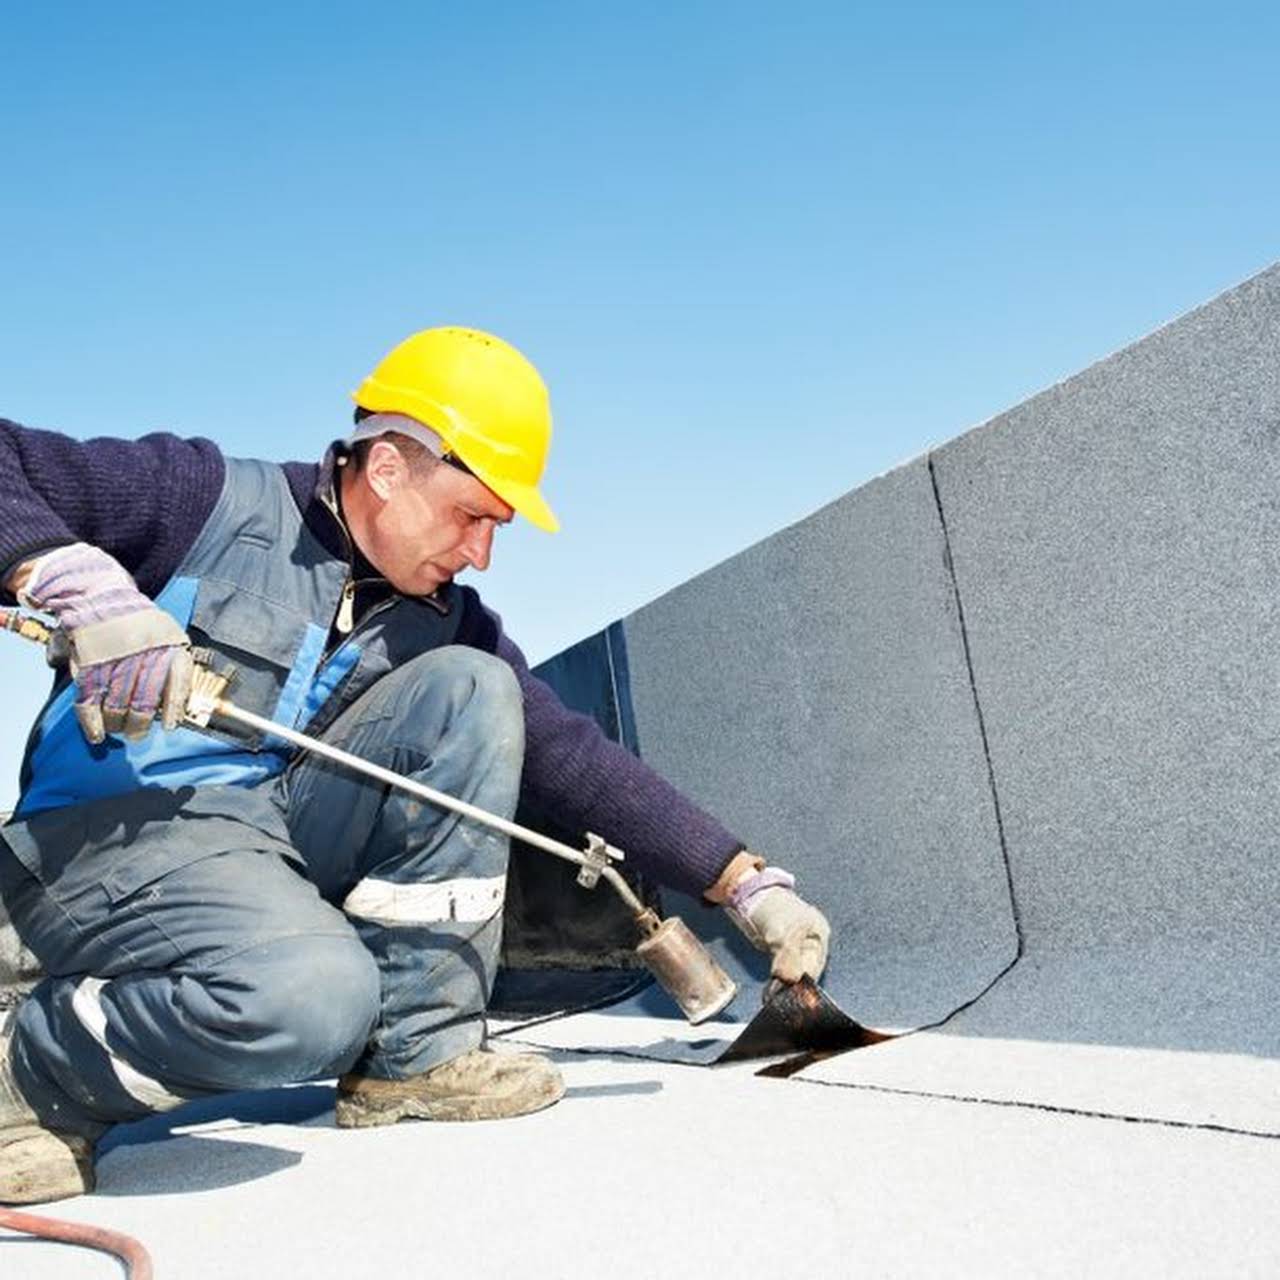 McHenry Roofing Offers Roofing Services, such as Drip Edge Flashing Repair near Gwynn Oak